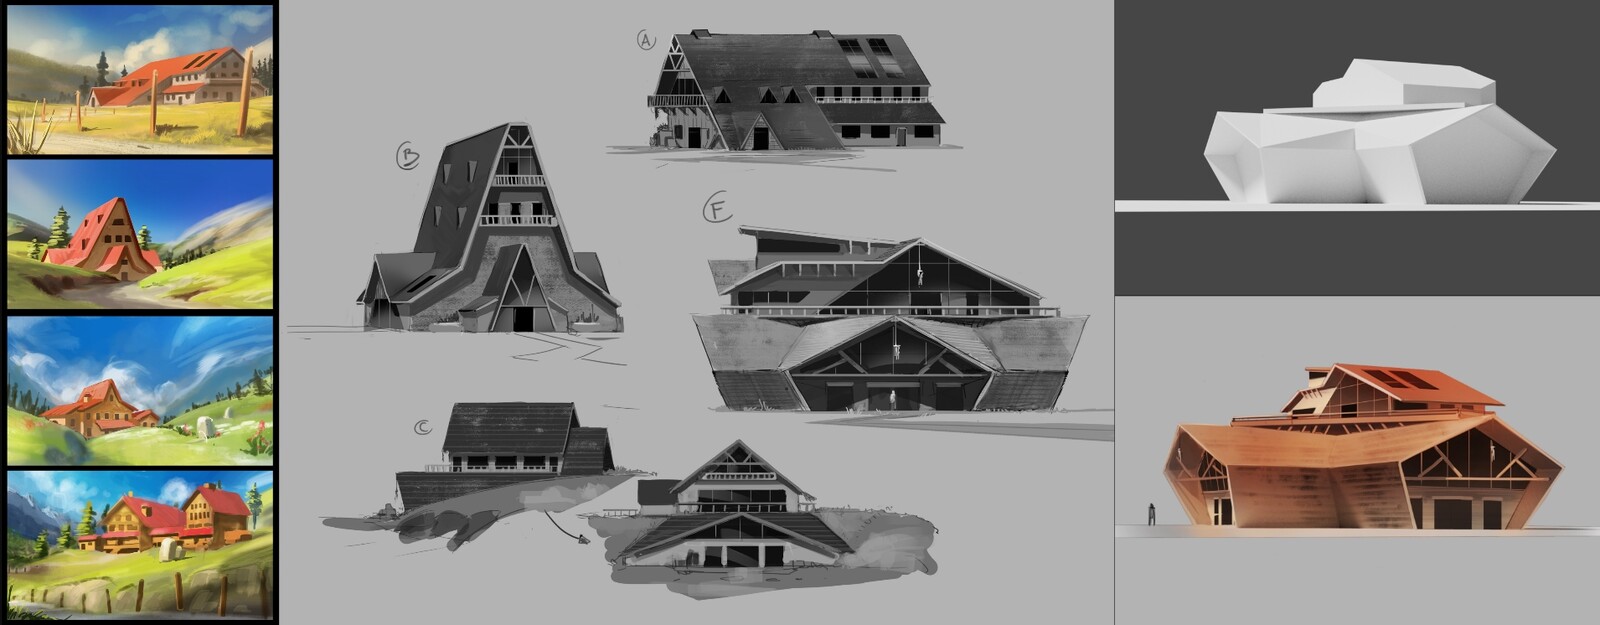 My sketches and iterations for the house design